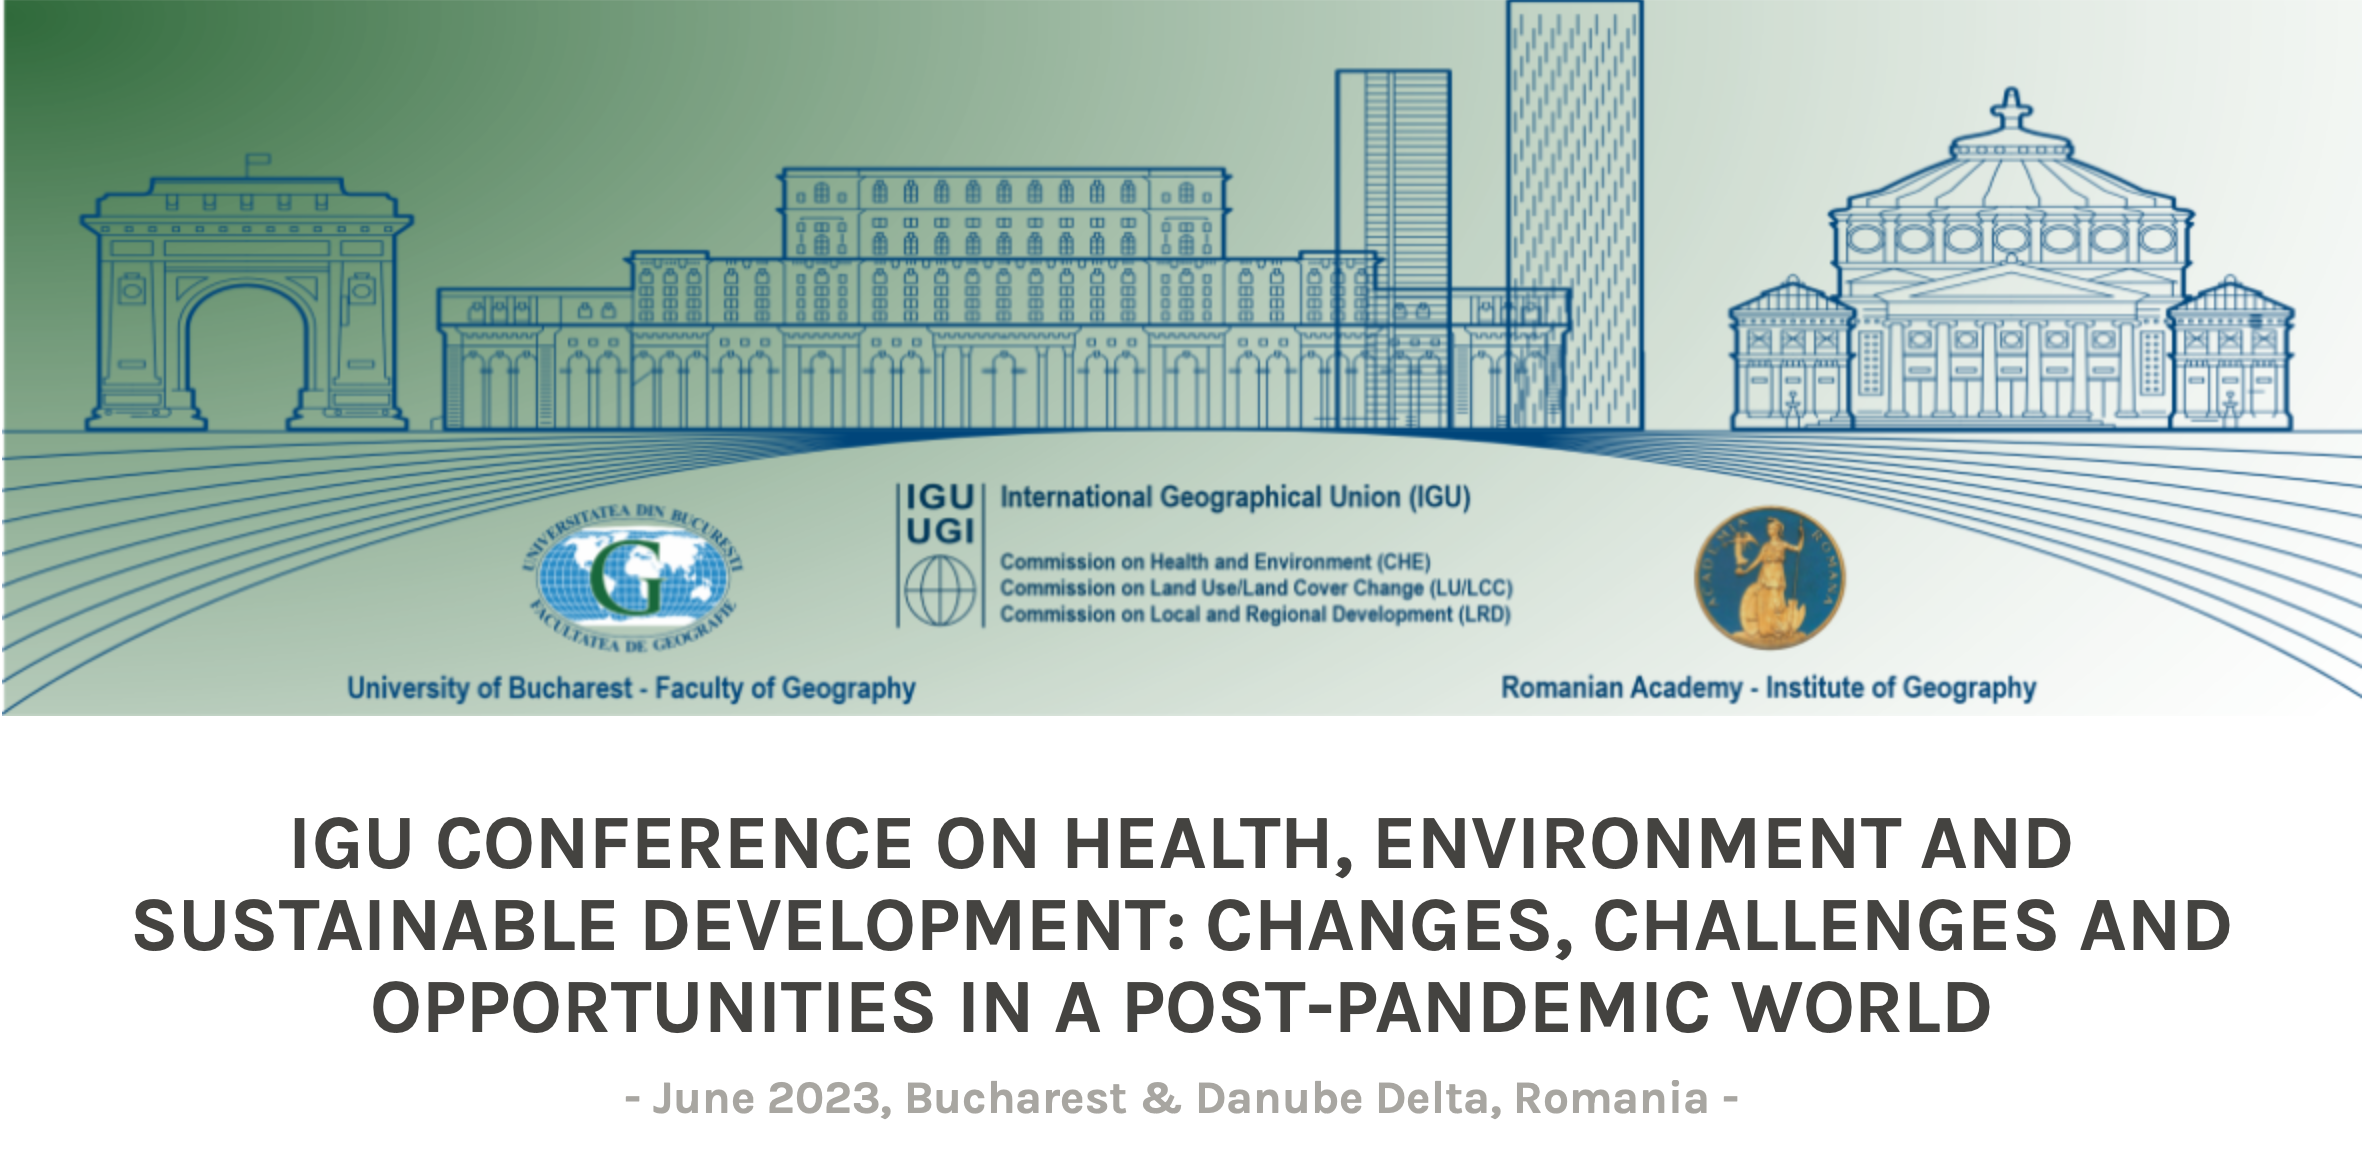 IGU CONFERENCE ON HEALTH, ENVIRONMENT AND SUSTAINABLE DEVELOPMENT: CHANGES, CHALLENGES AND OPPORTUNITIES IN A POST-PANDEMIC WORLD, Bucharest, Bucuresti - Ilfov, Romania